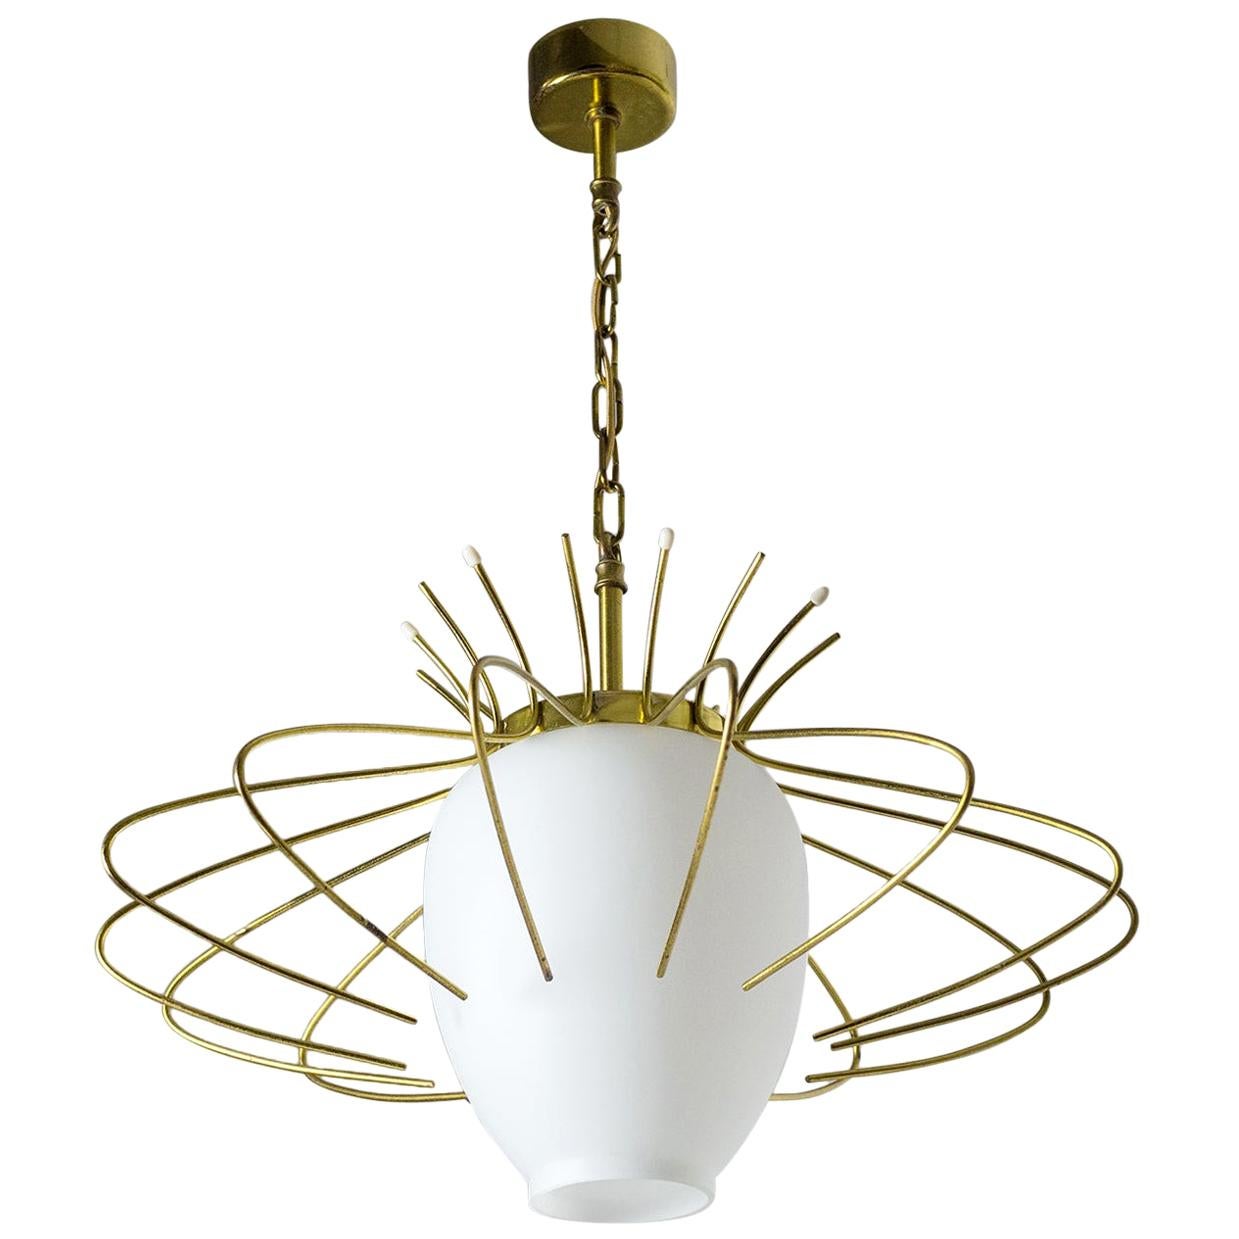 French Modernist Pendant, 1960s, Brass and Satin Glass